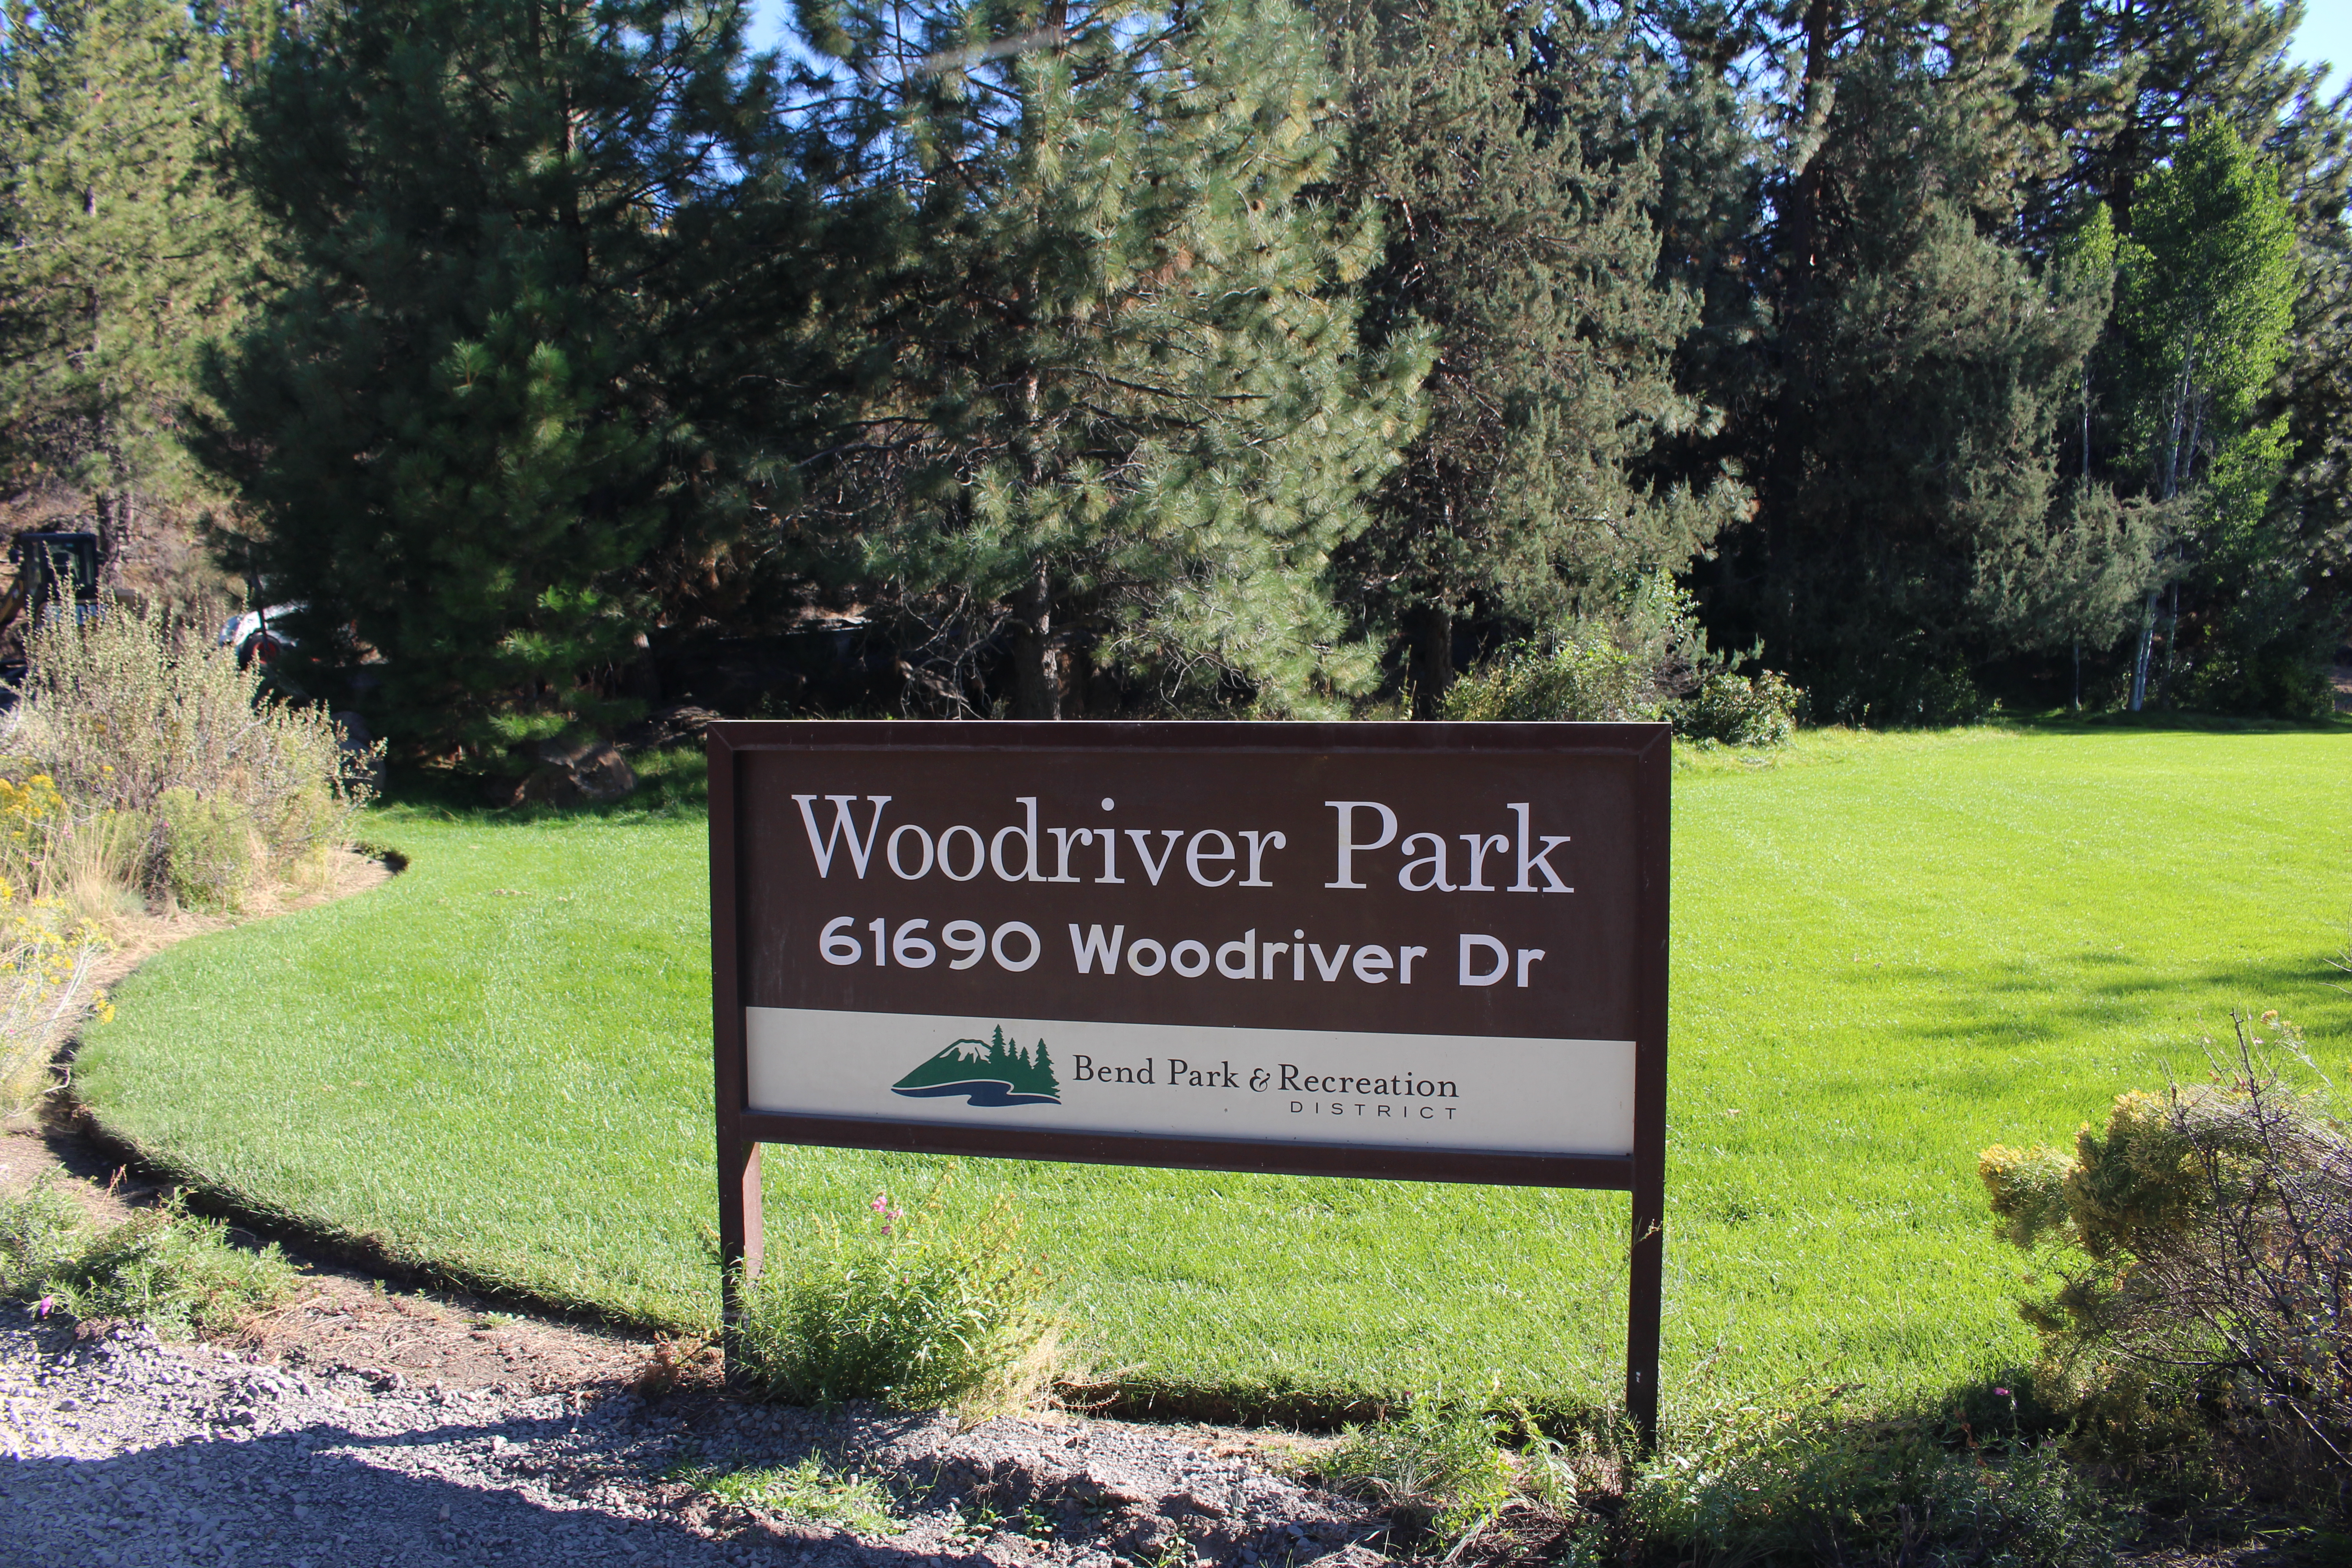 the woodriver park entry sign